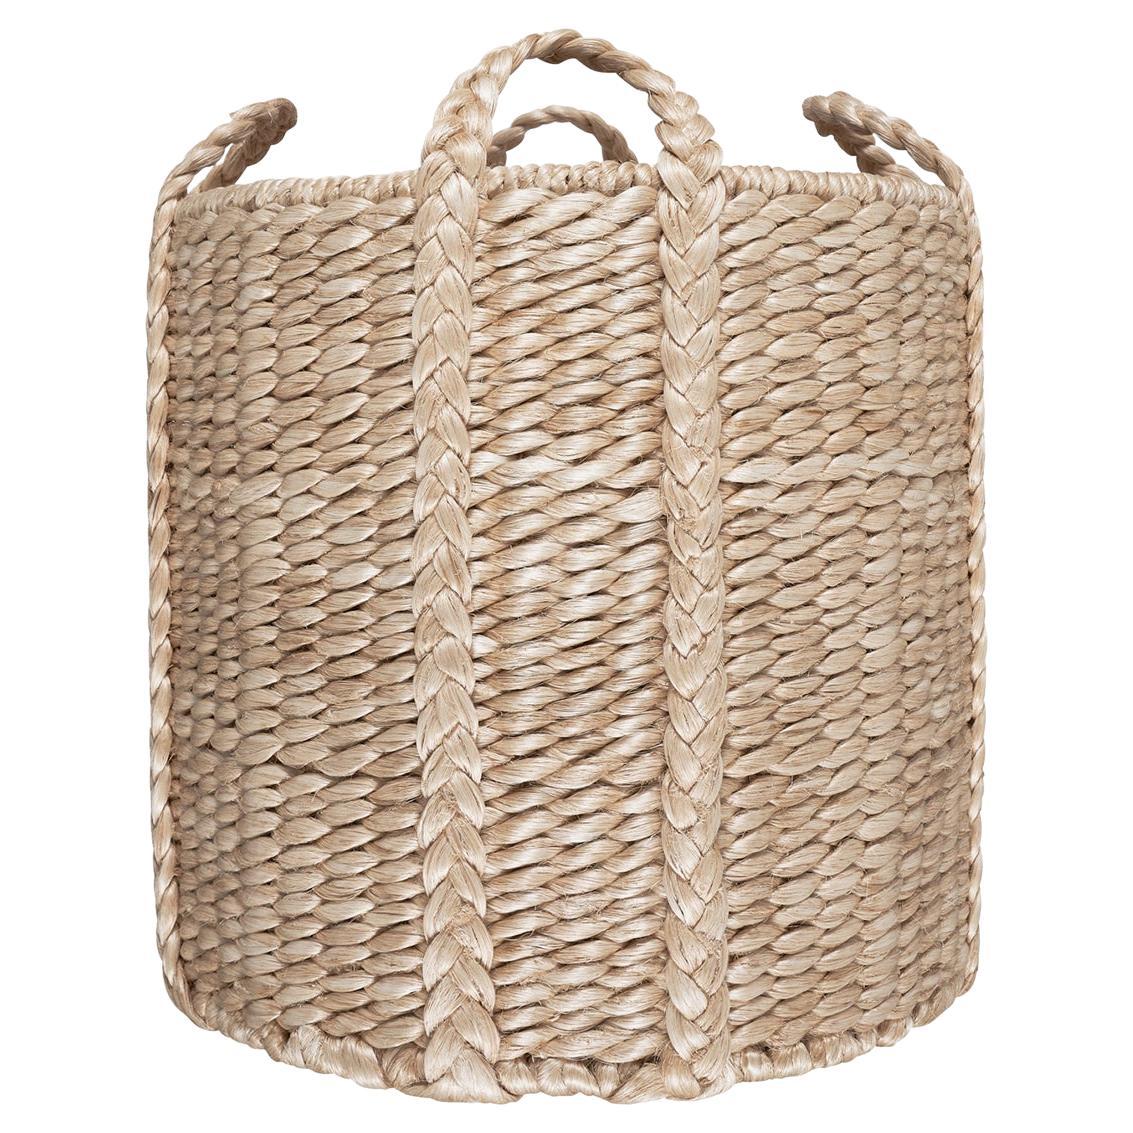 Lubic Abaca Basket, Light Natural 16" For Sale